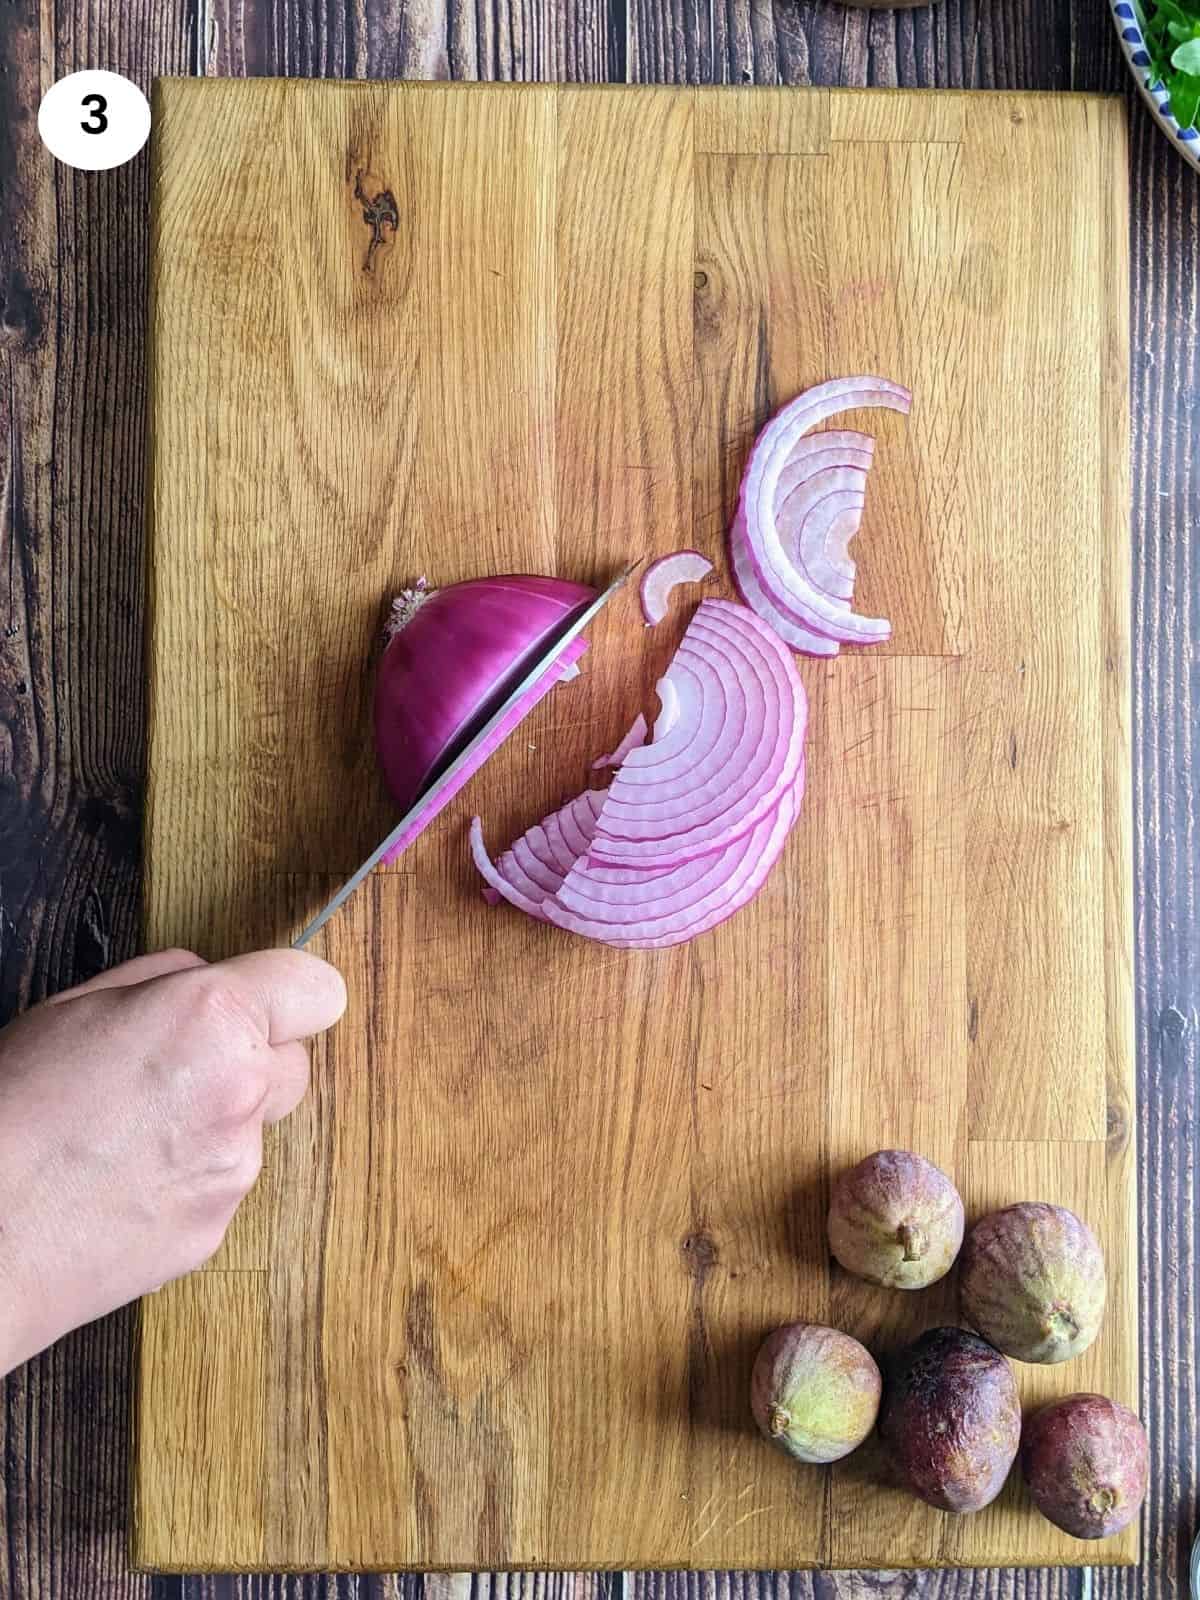 Cutting the onion into slices.